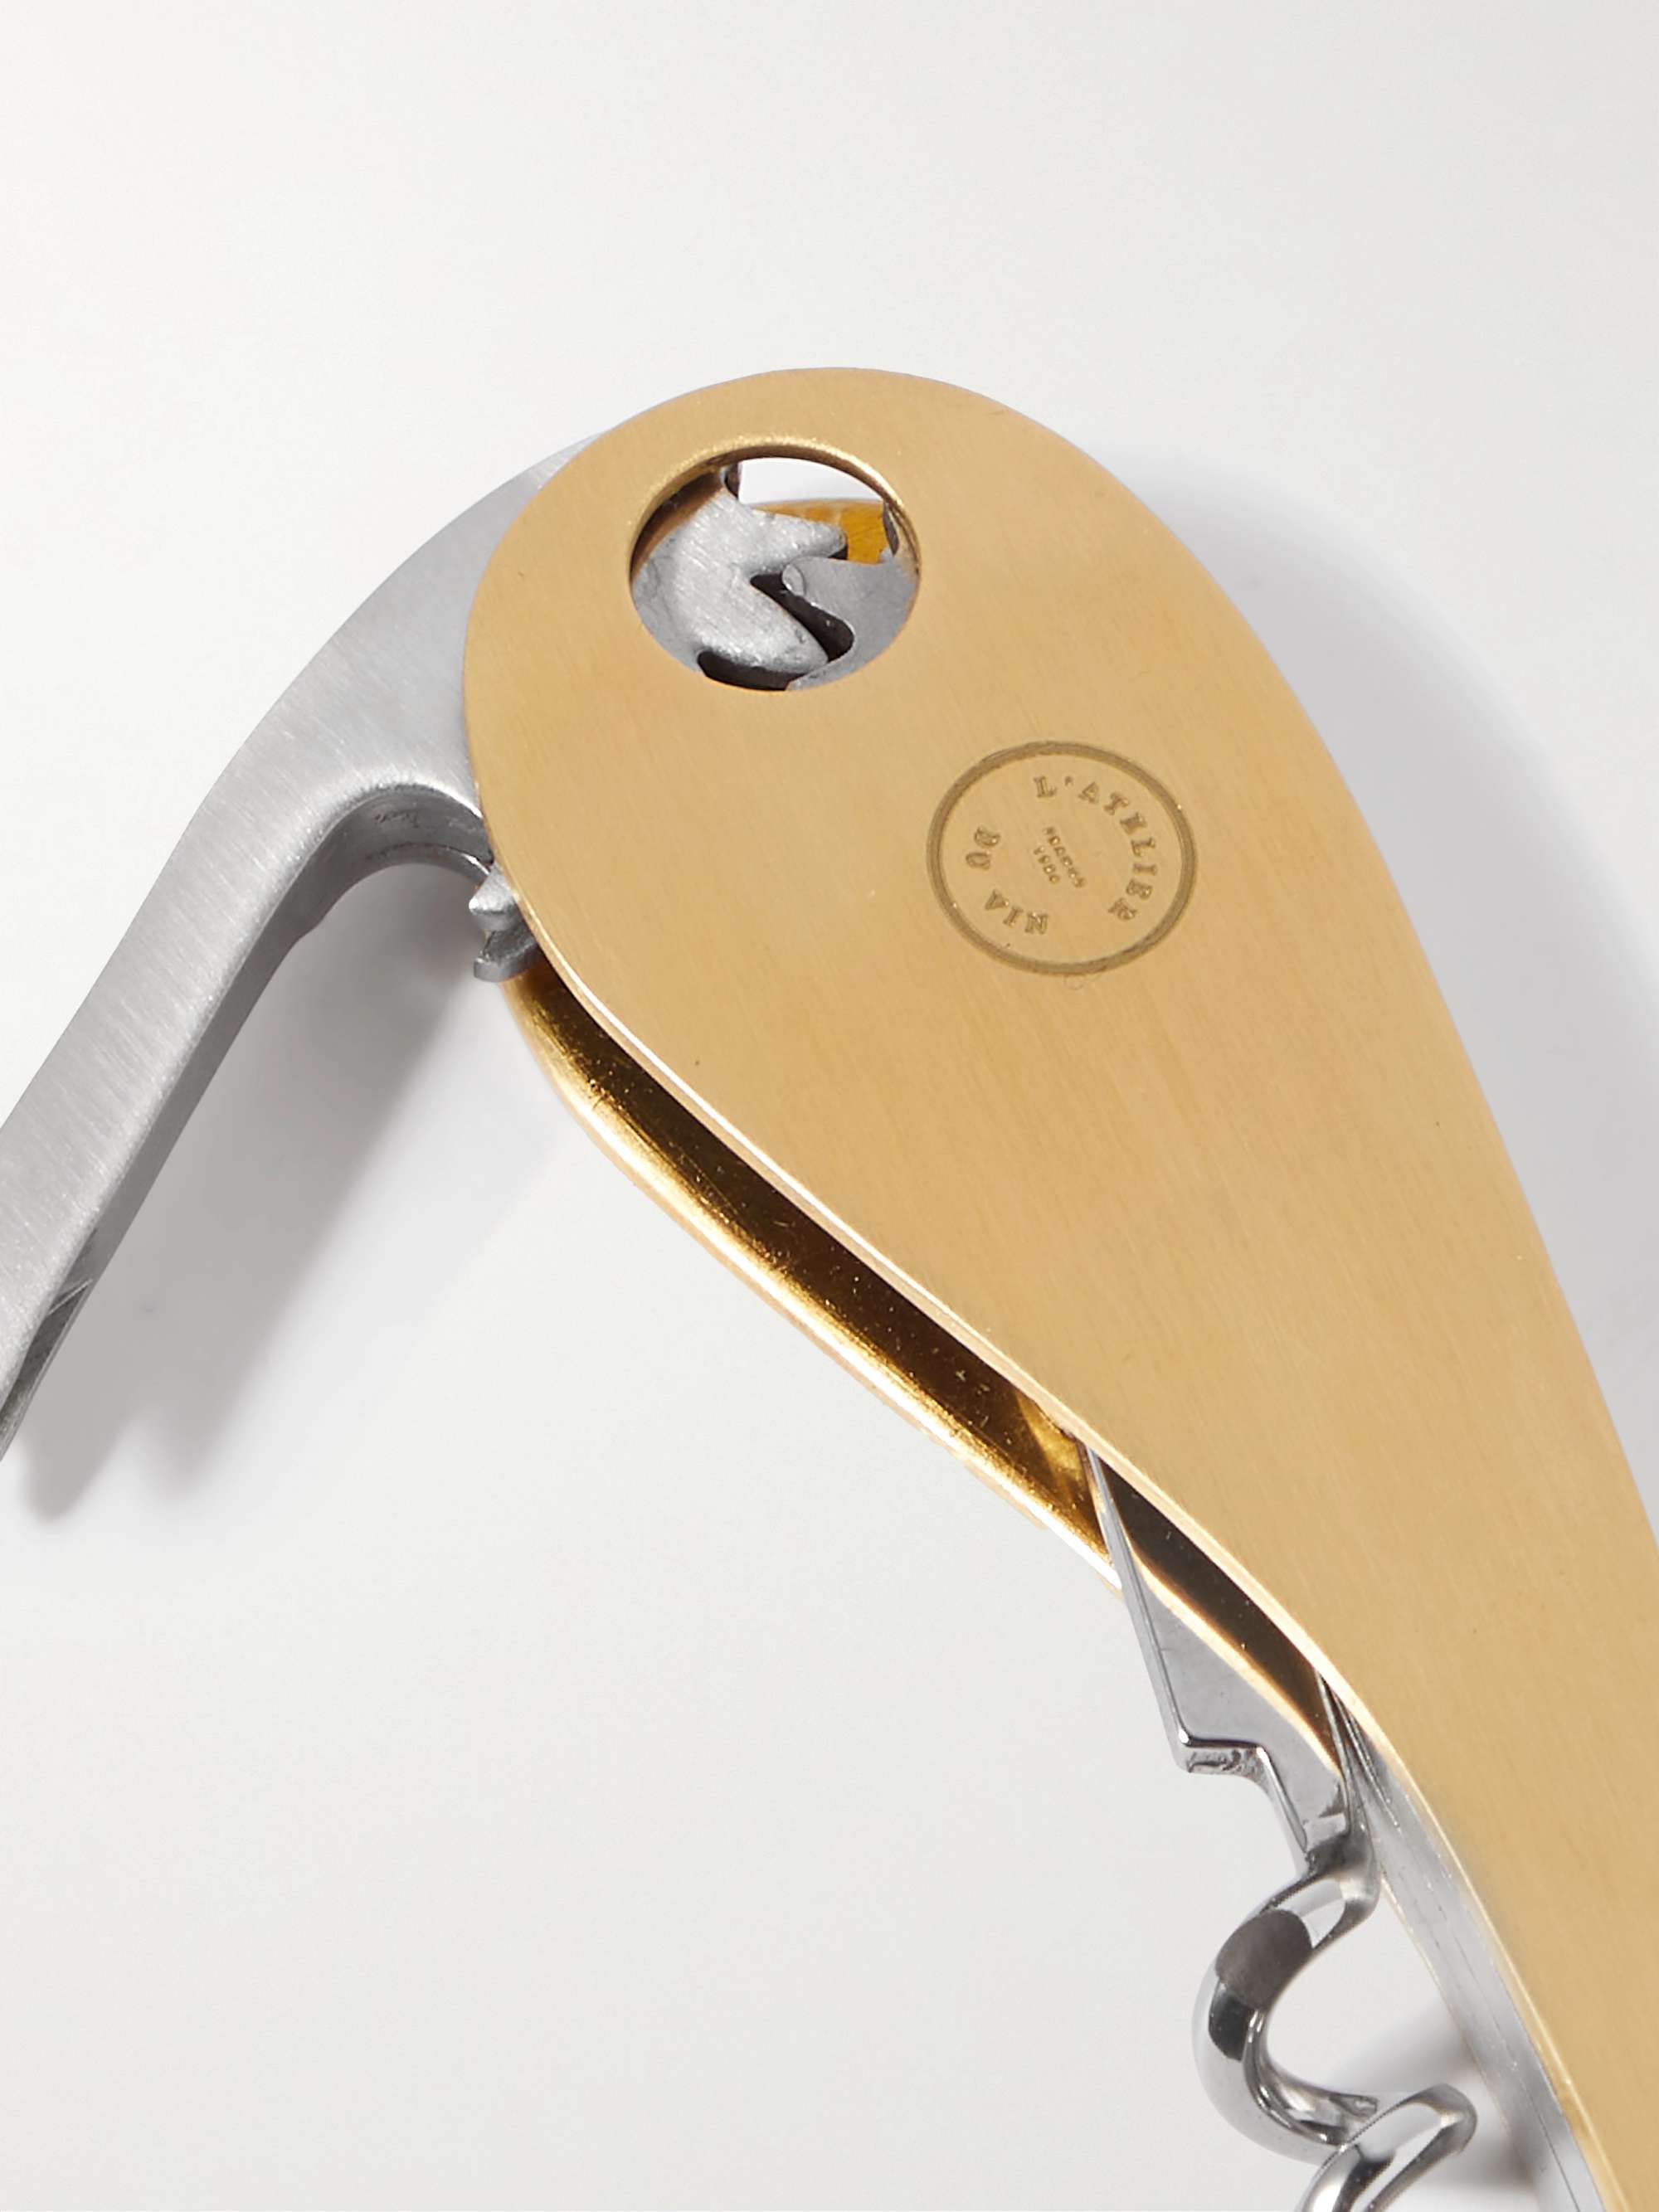 L'ATELIER DU VIN Soft Machine Gold-Tone and Stainless Steel Corkscrew